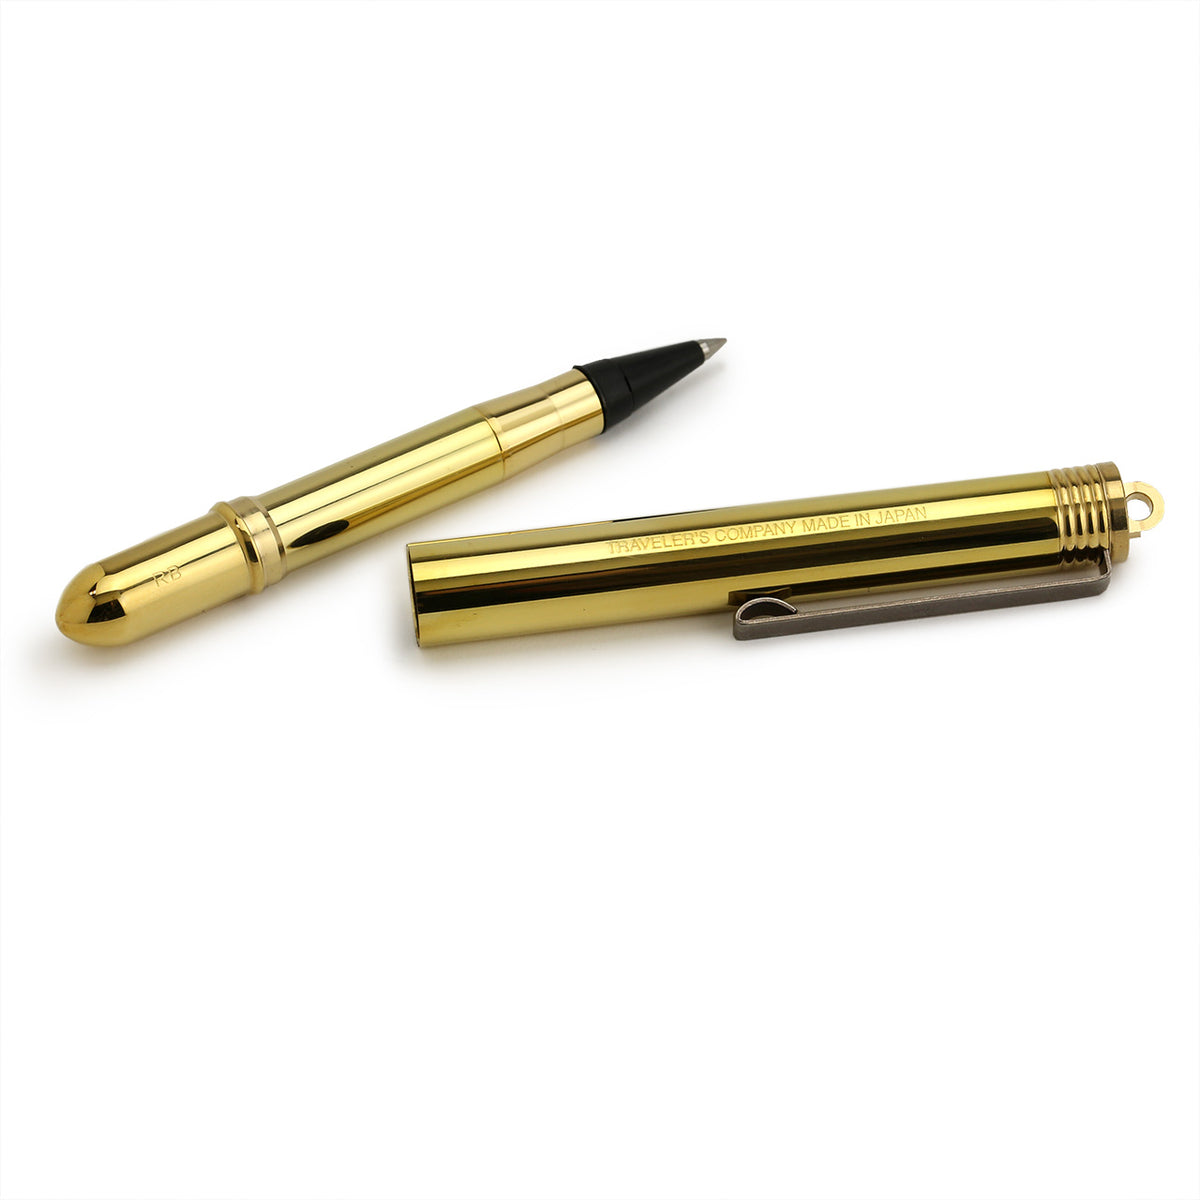 disassembled brass rollerball pen showing the pen end and the long cap which can be posted to make a regular length pen